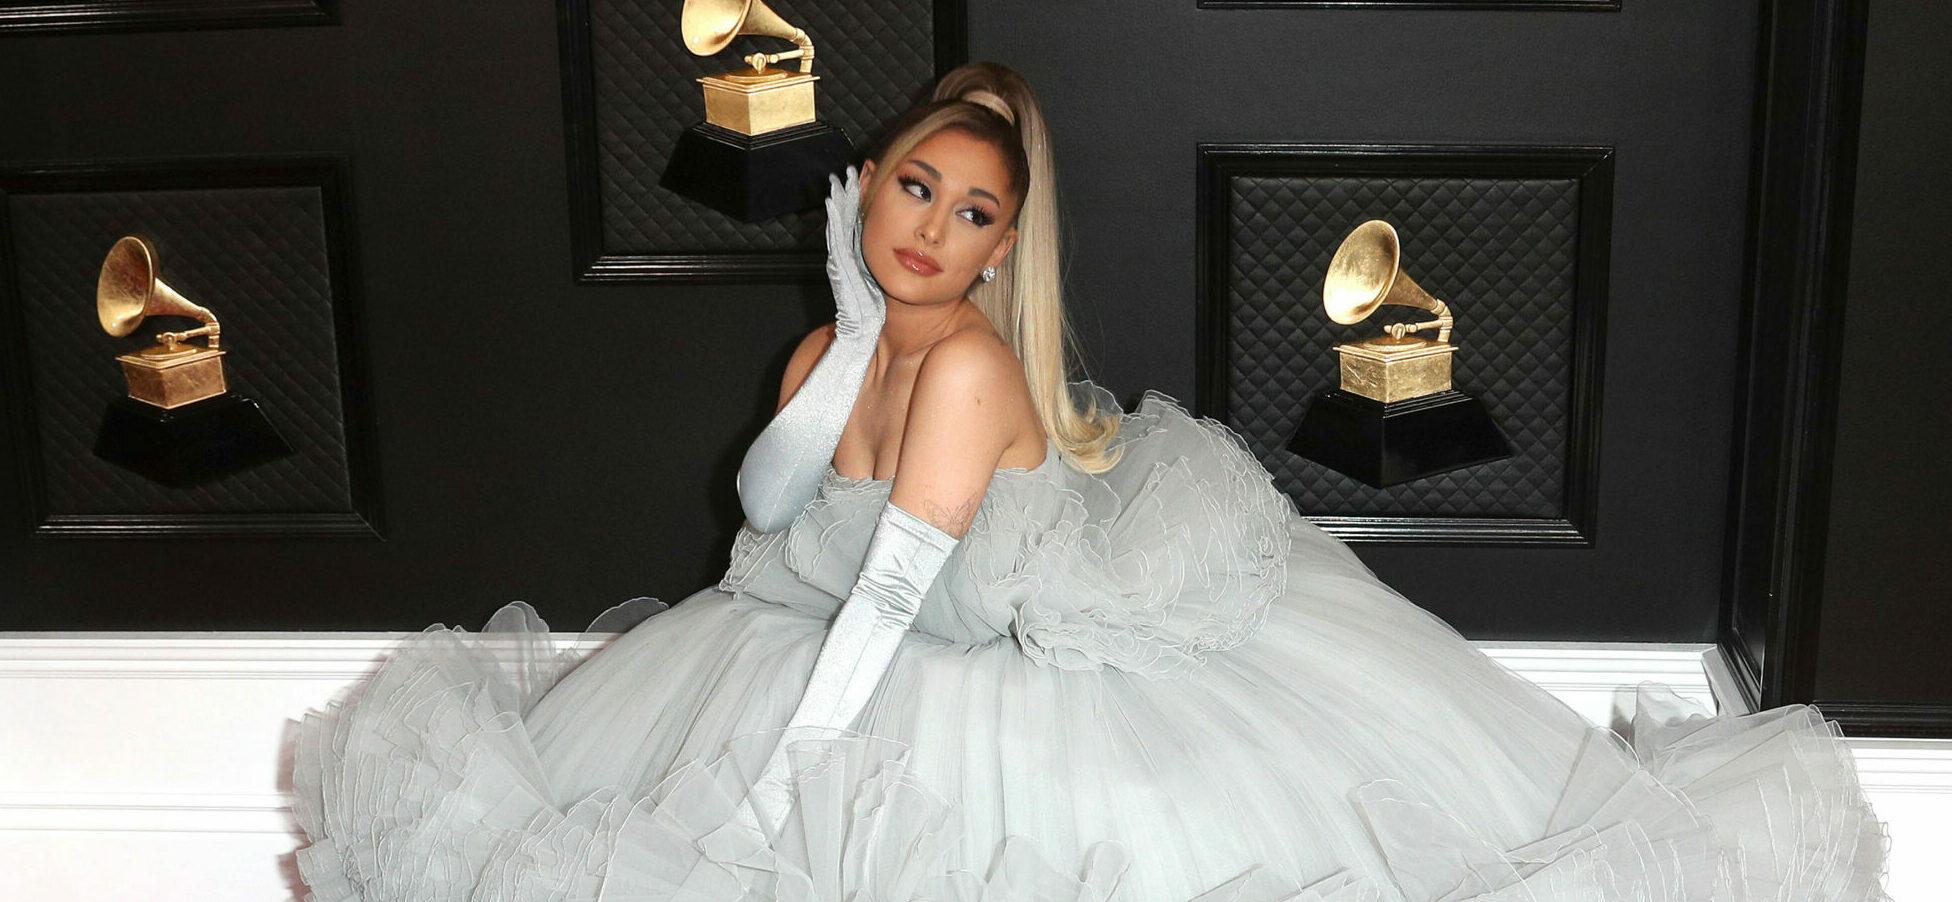 Ariana Grande at the 62nd Annual Grammy Awards sporting a gray ball gown.